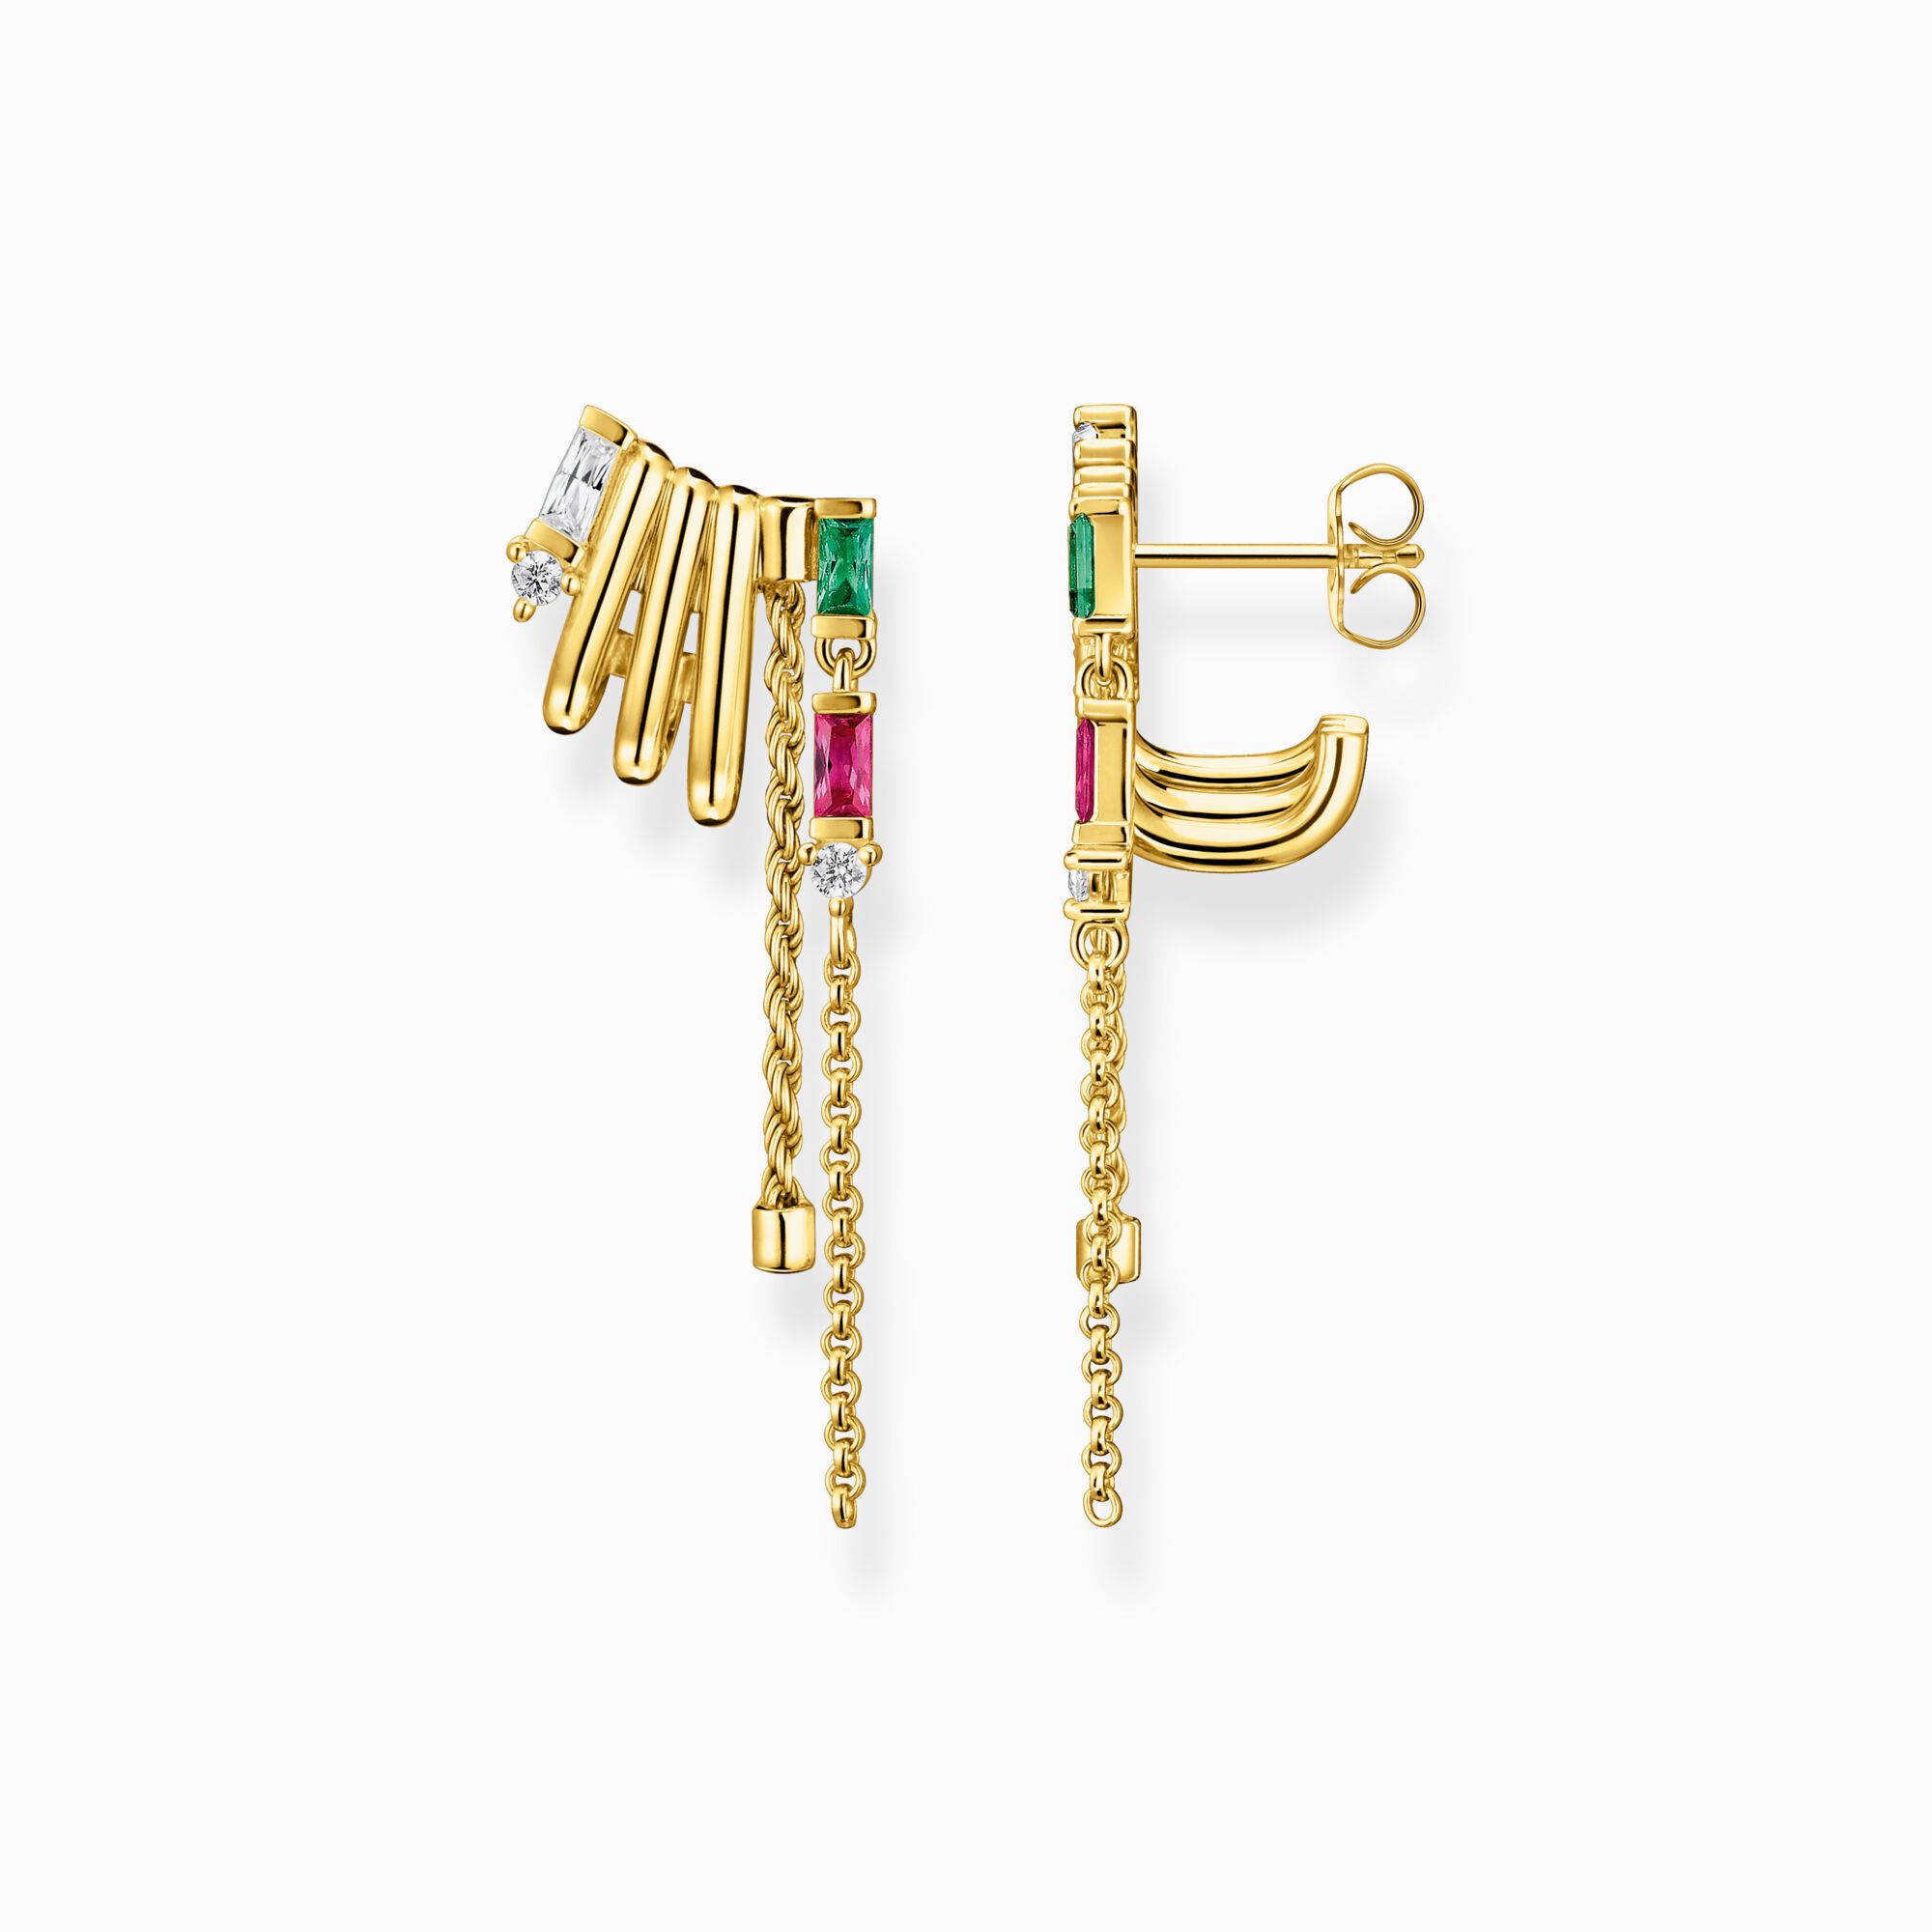 Thomas Sabo + Gold Plated Earrings With Colourful Baguette-Cut Stones